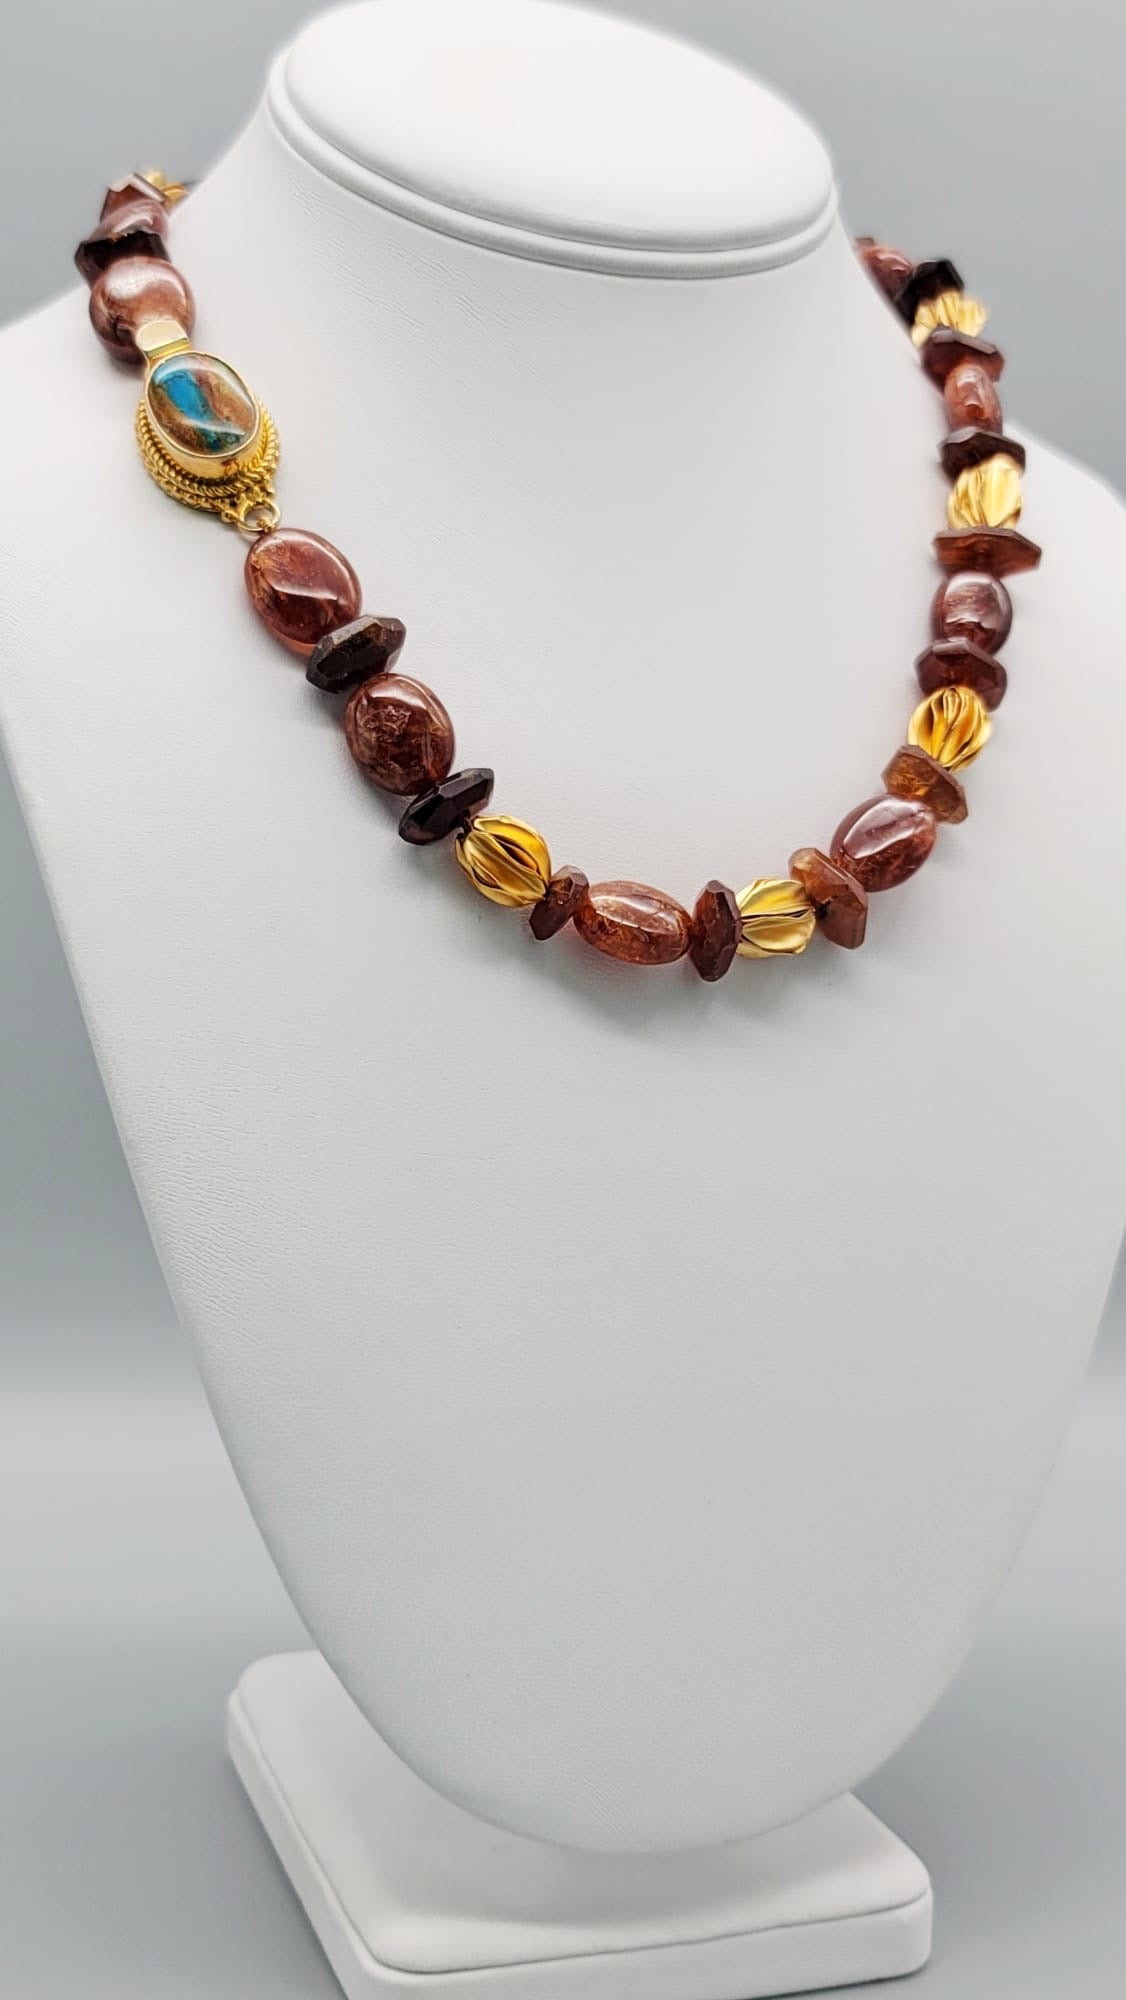 One-of-a-Kind

Hessonite Garnet set in a classic single strand necklace . The unusually rich reddish-brown coloring of the polished beads, mixed with the sharpness of the more deeply colored roundels blend extremely well with the unusual vermeil